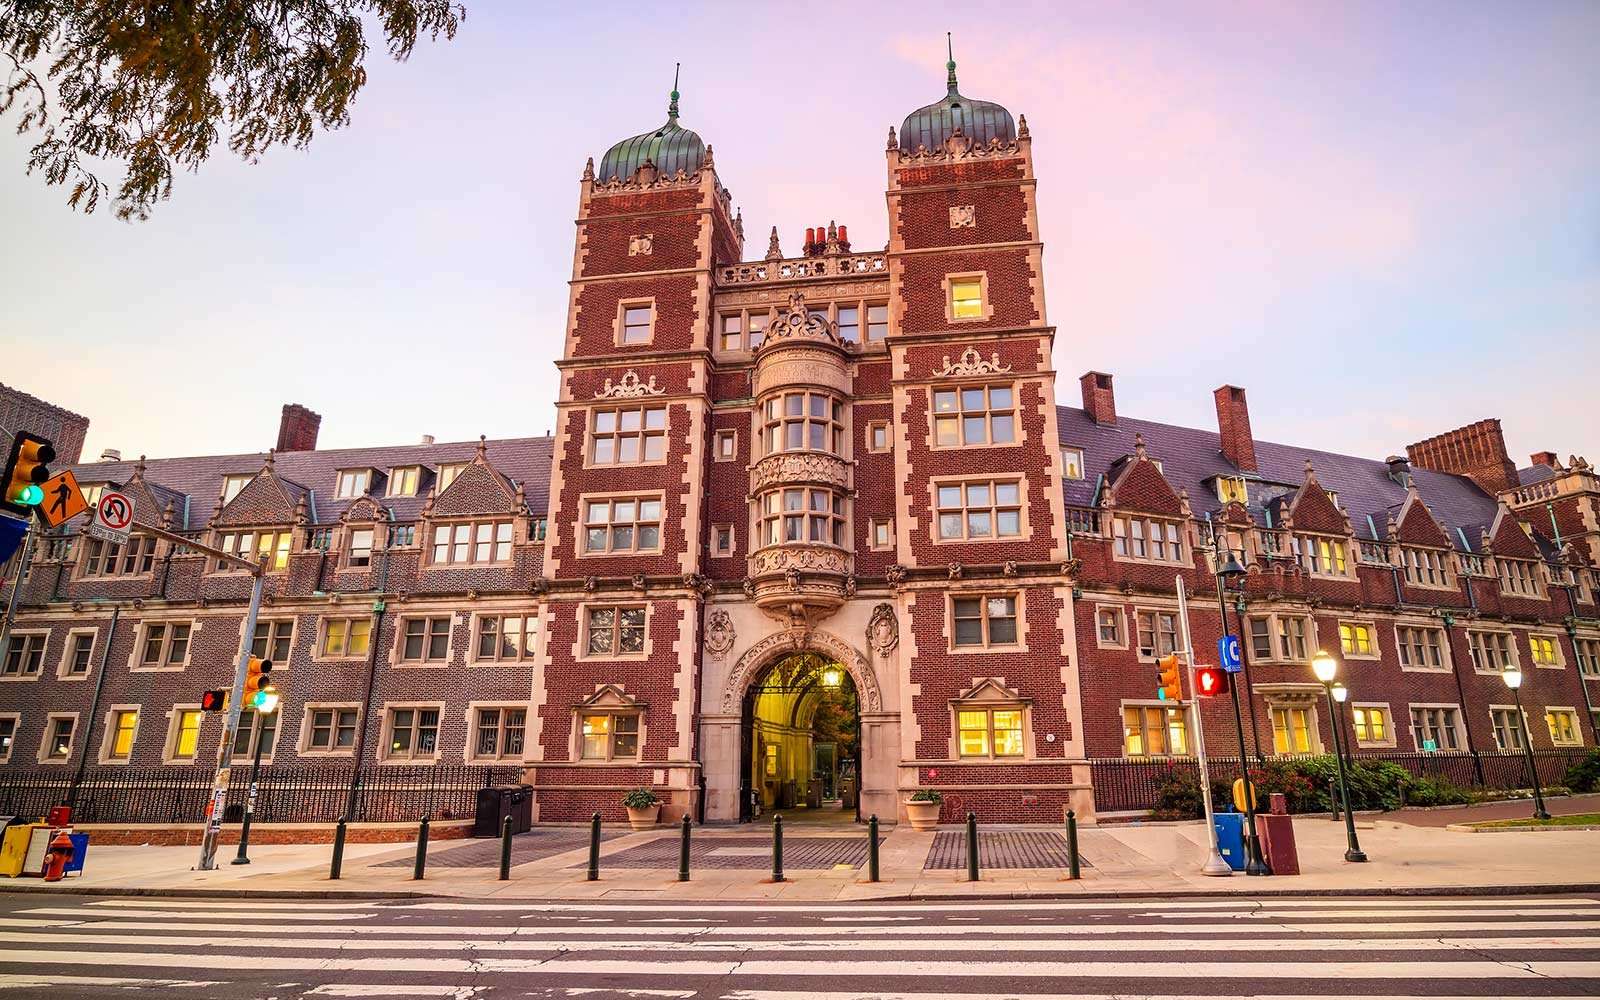 The Best College Architecture in the United States